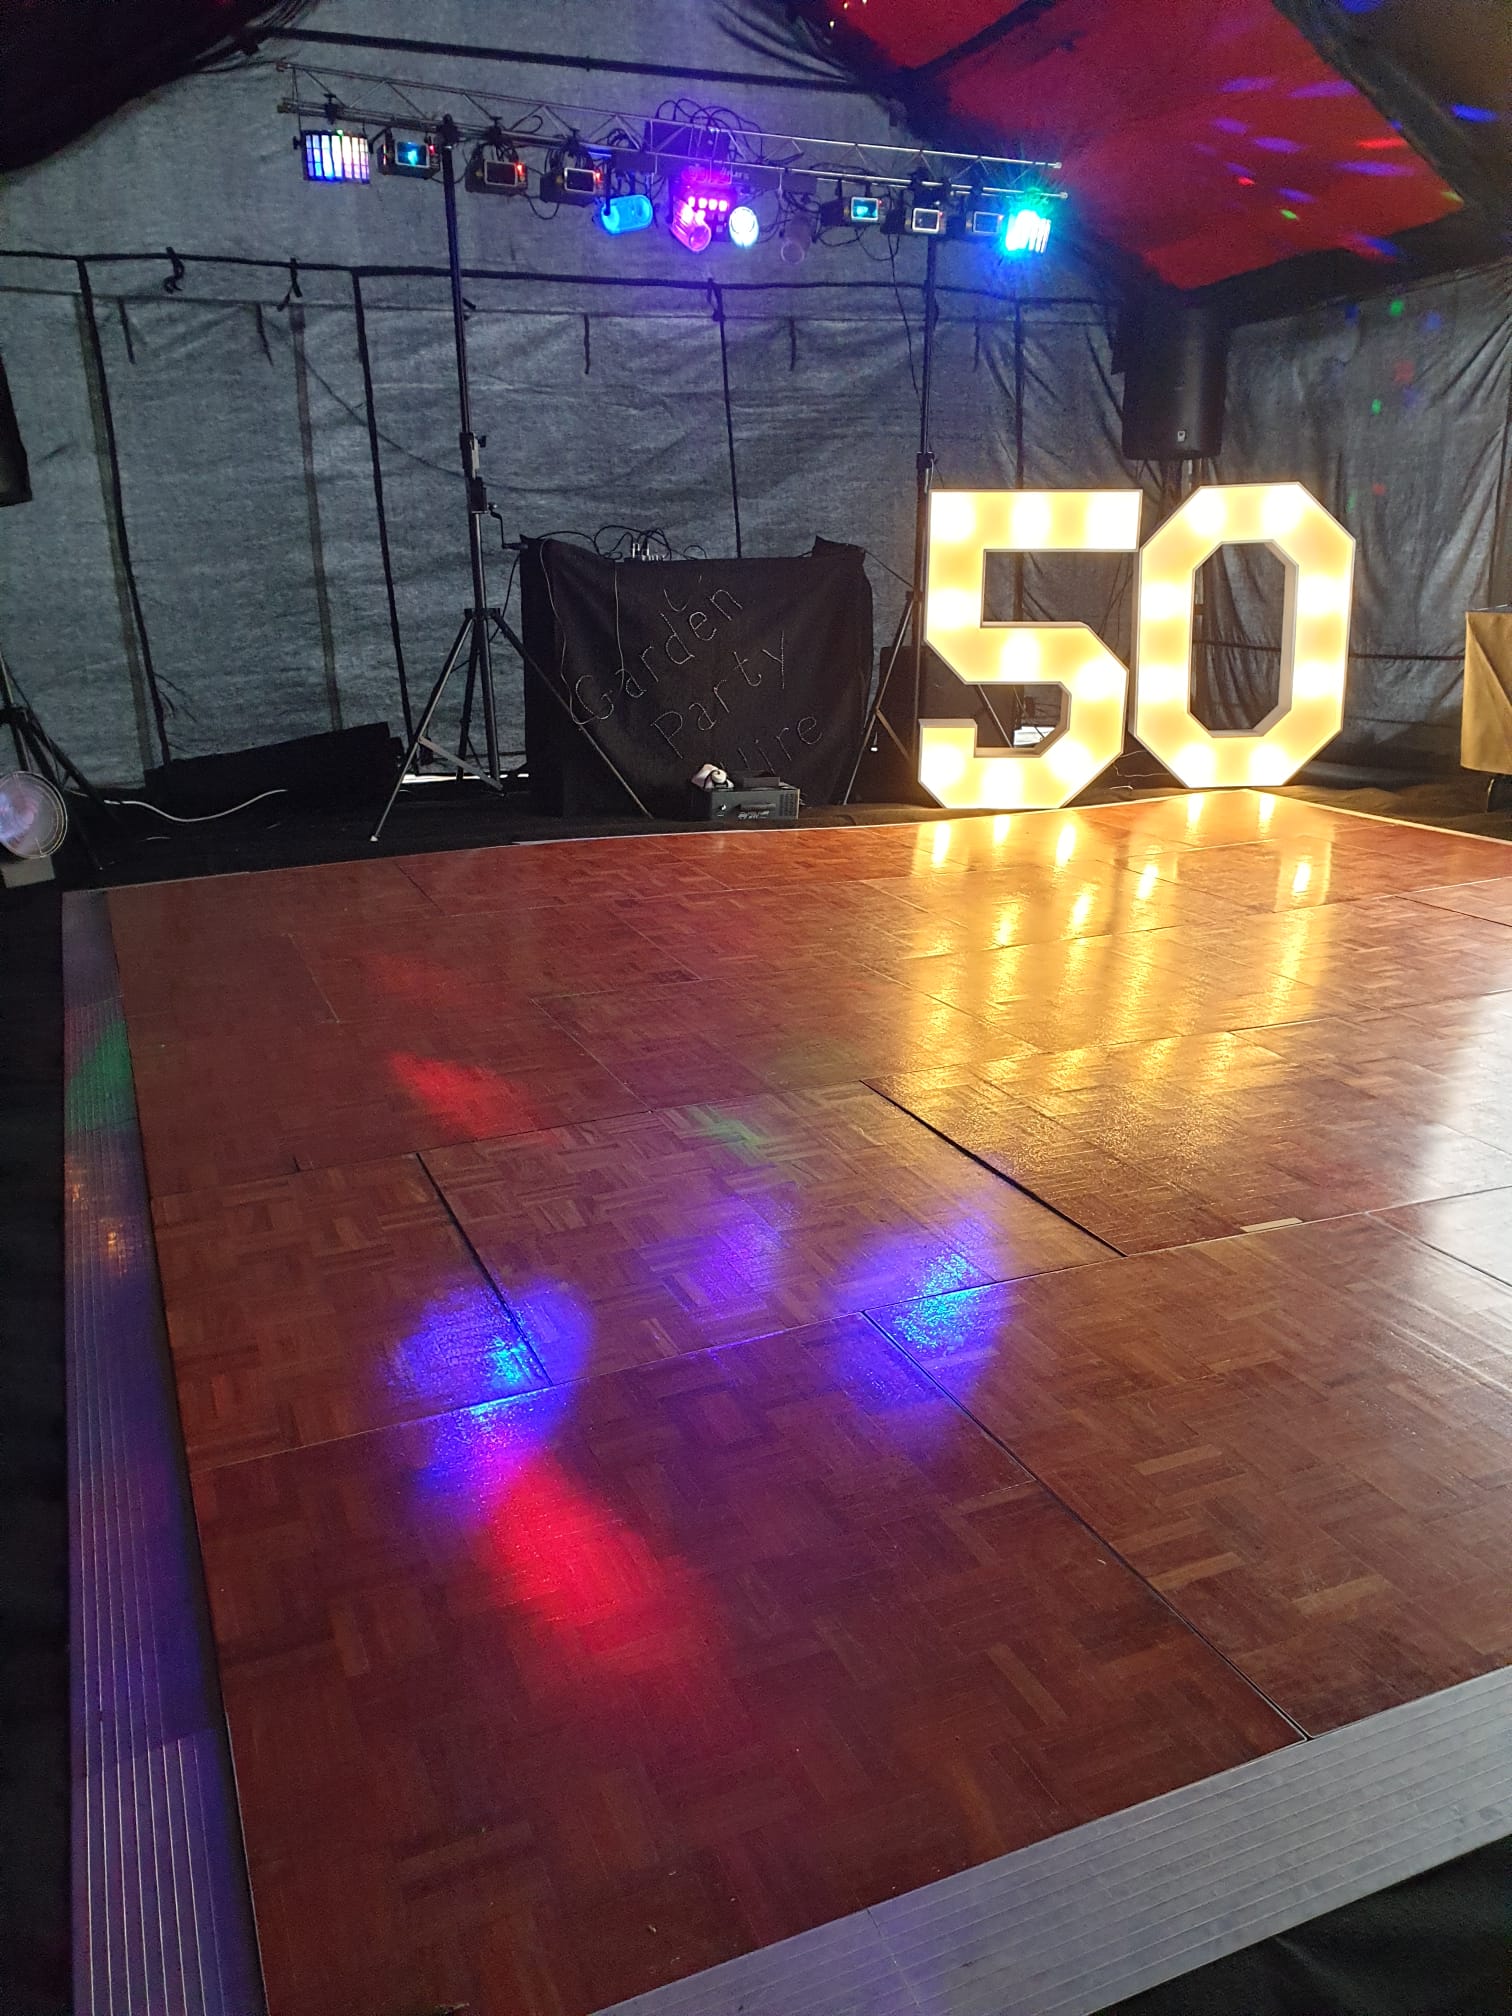 50th birthday party in a marquee with full disco rig, lights, lasers and dance floor